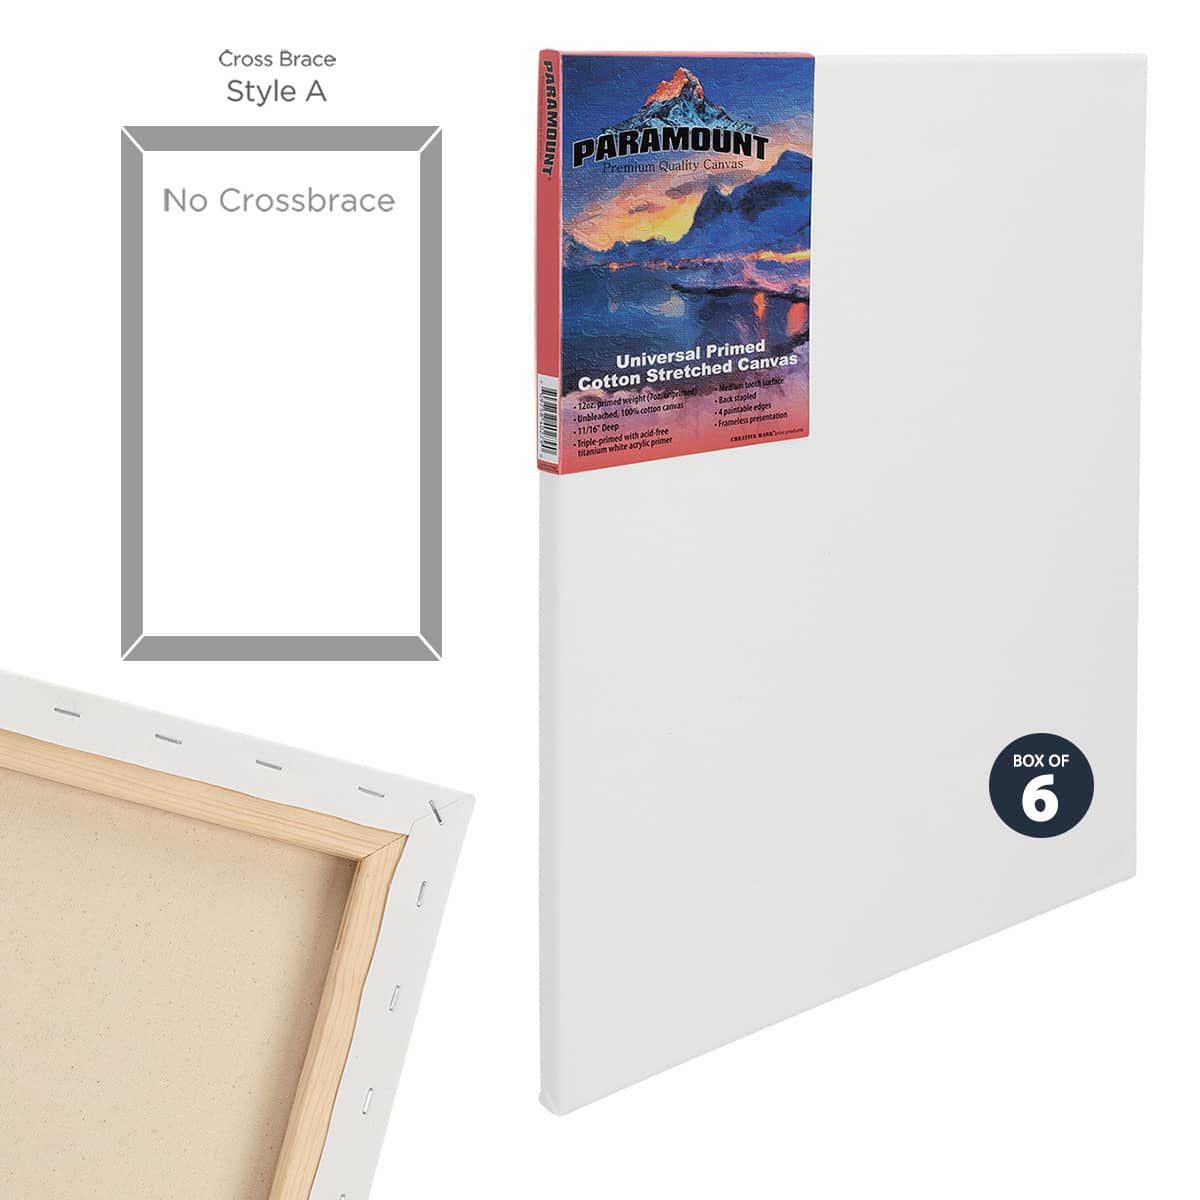 8.5x11 Mat for 5.5x8.5 Photo - Precut Textured Cream Picture Matboard for  Frames 8.5 x 11 Inches - Bevel Cut to Display Art 5.5 x 8.5 - Acid Free  Pack